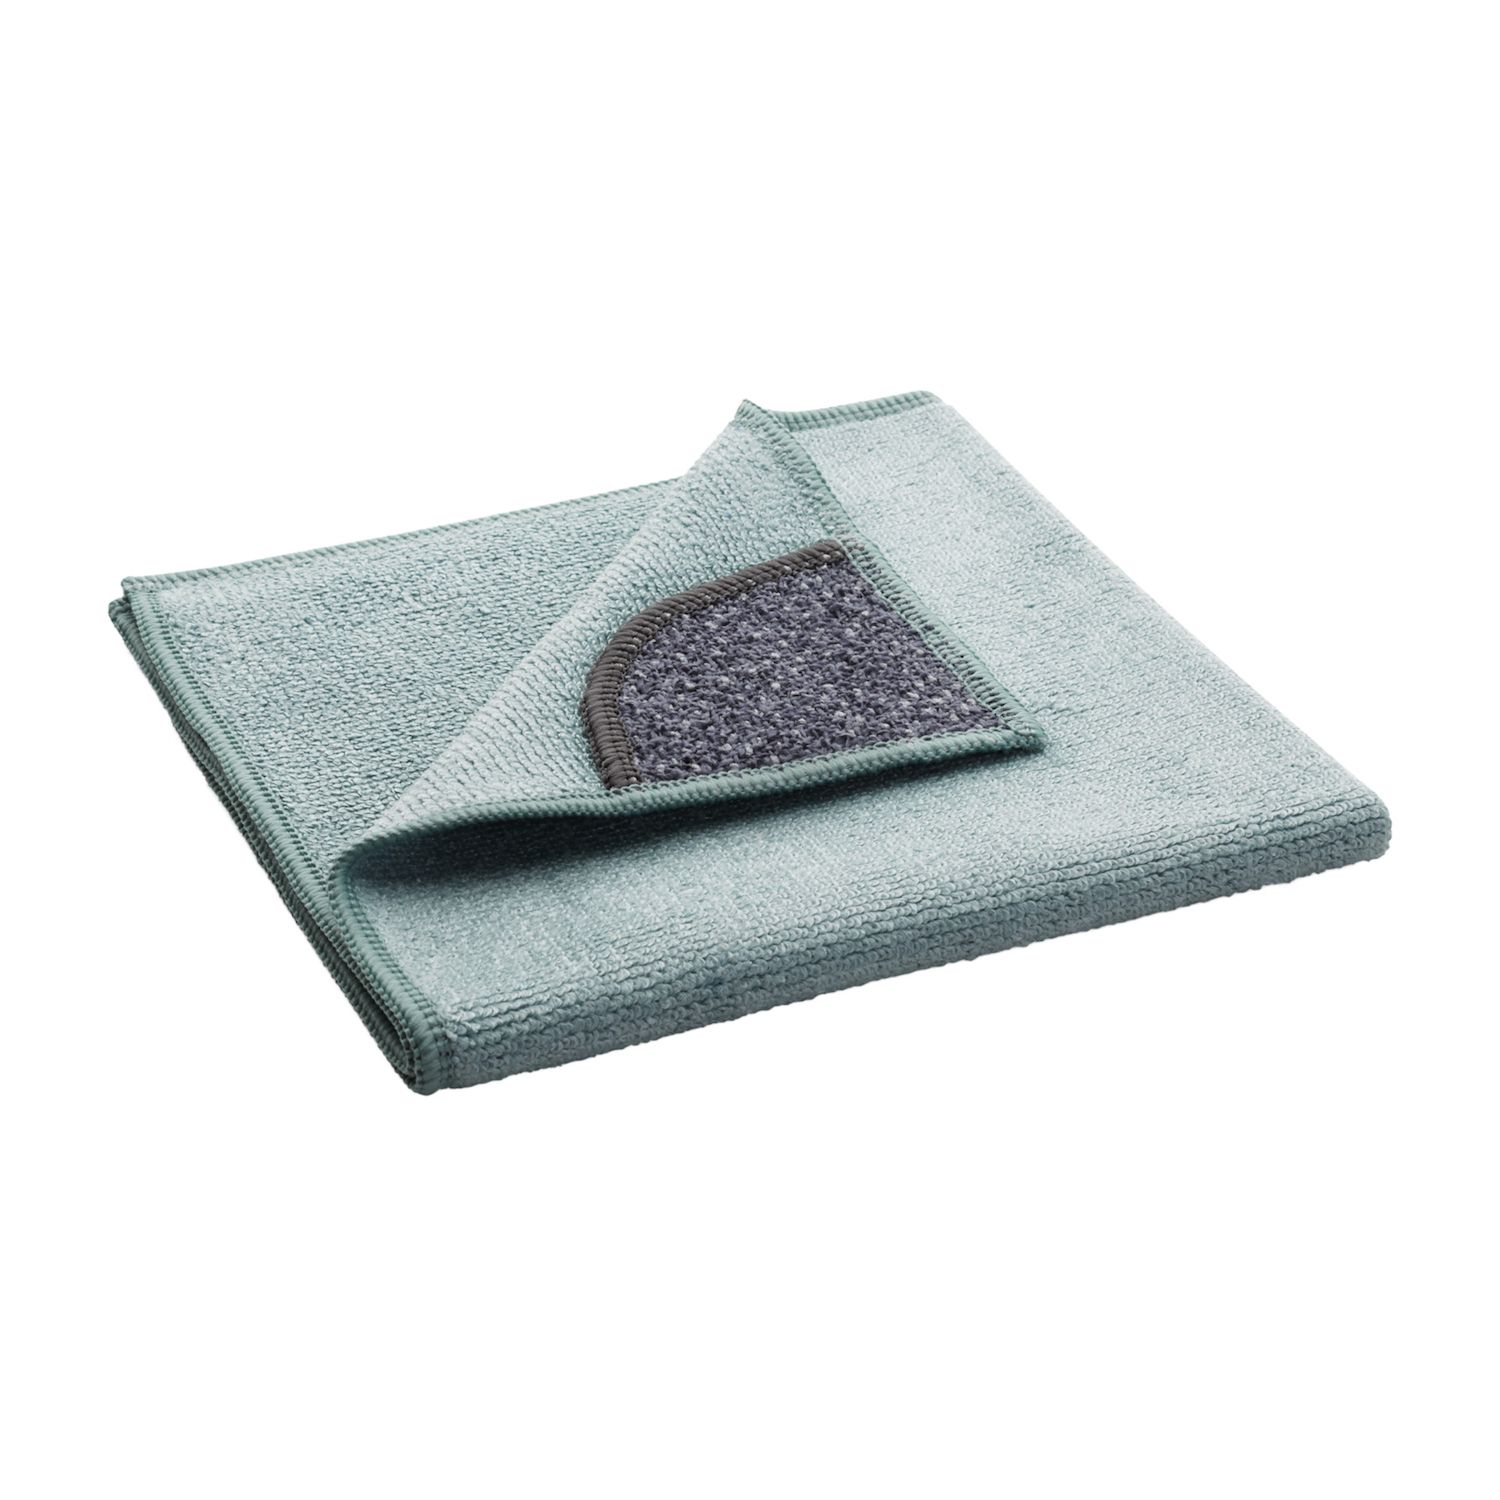 Image for E-Cloth Kitchen Microfiber Cleaning Cloth at Kohl's.